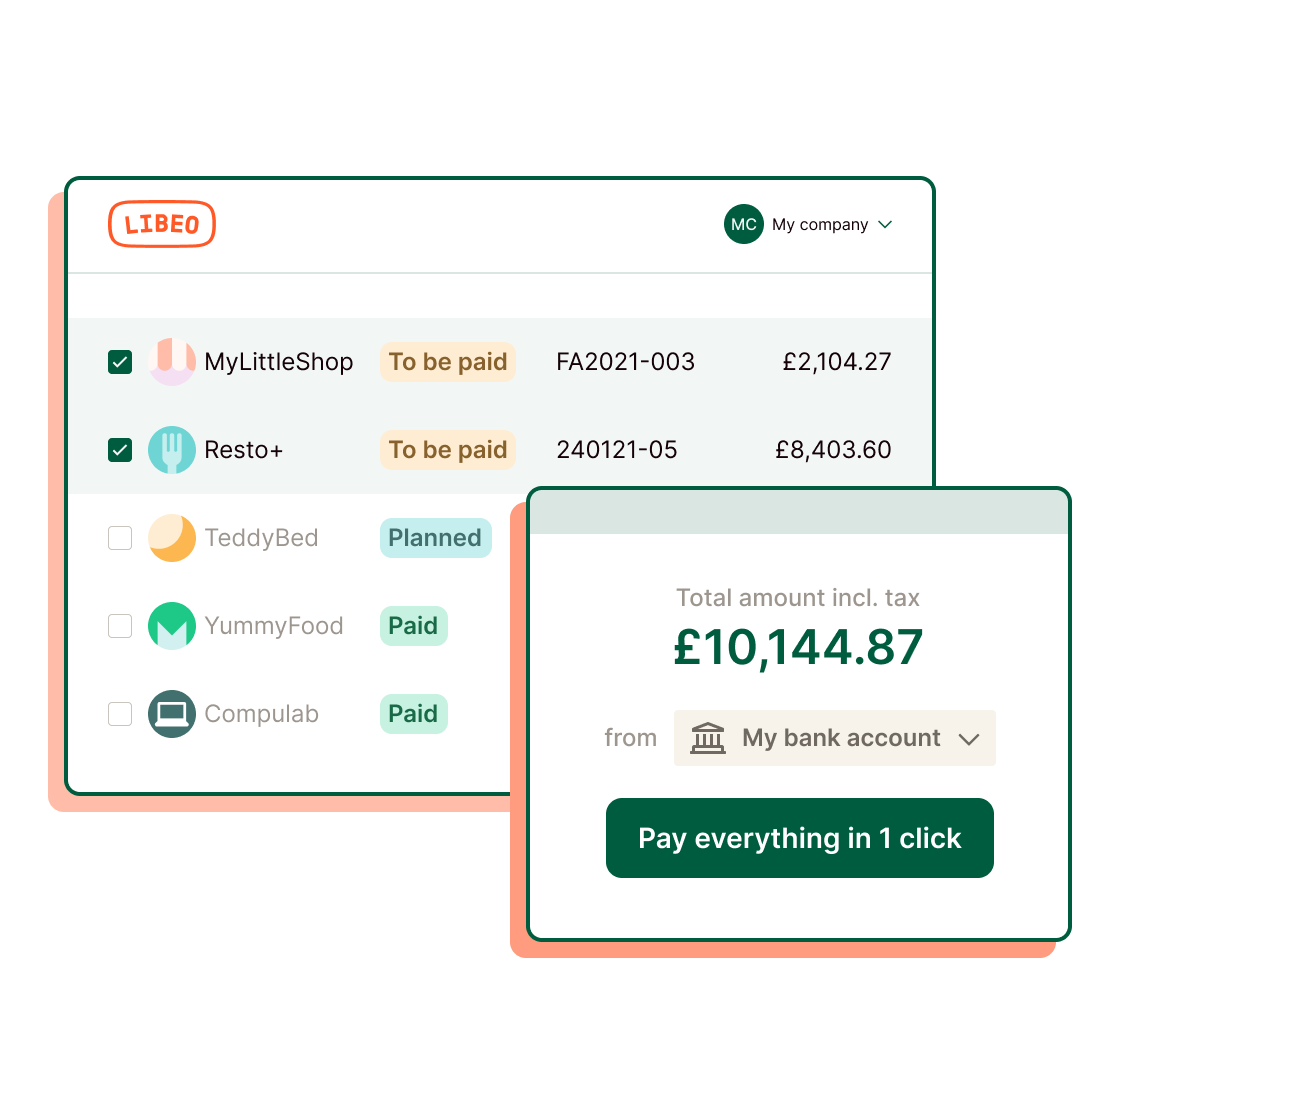 Libeo - Easily pay all your invoices, in one click